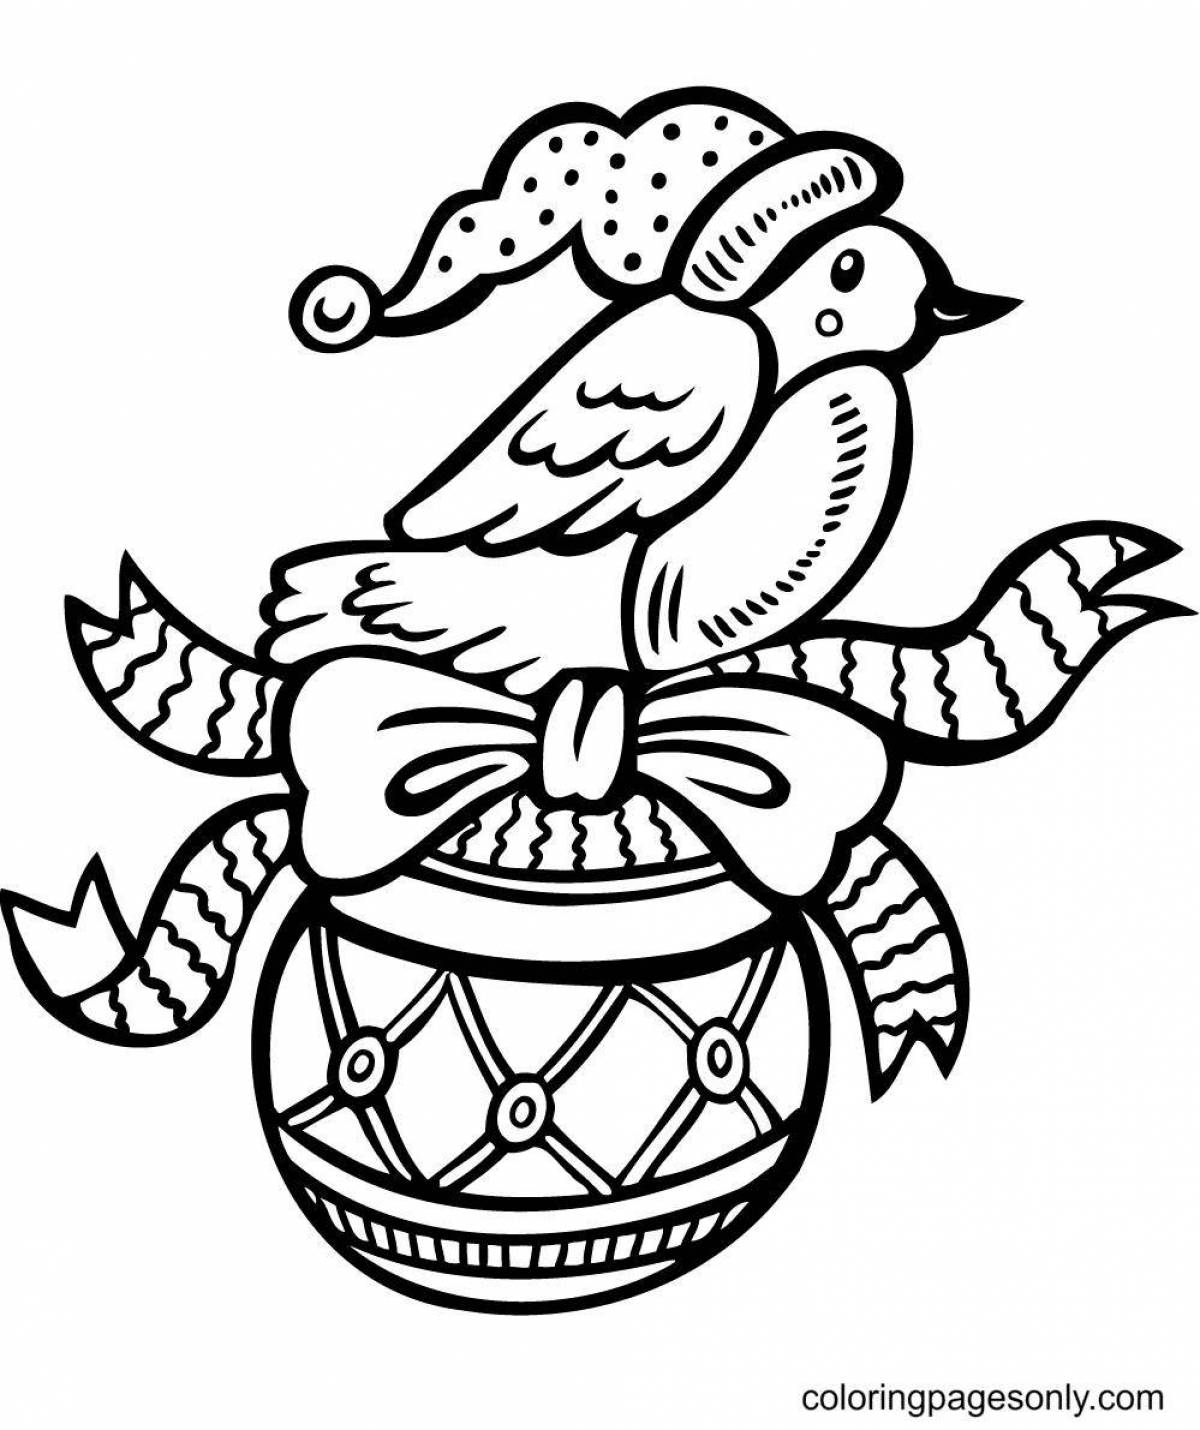 Pretty christmas bird coloring page